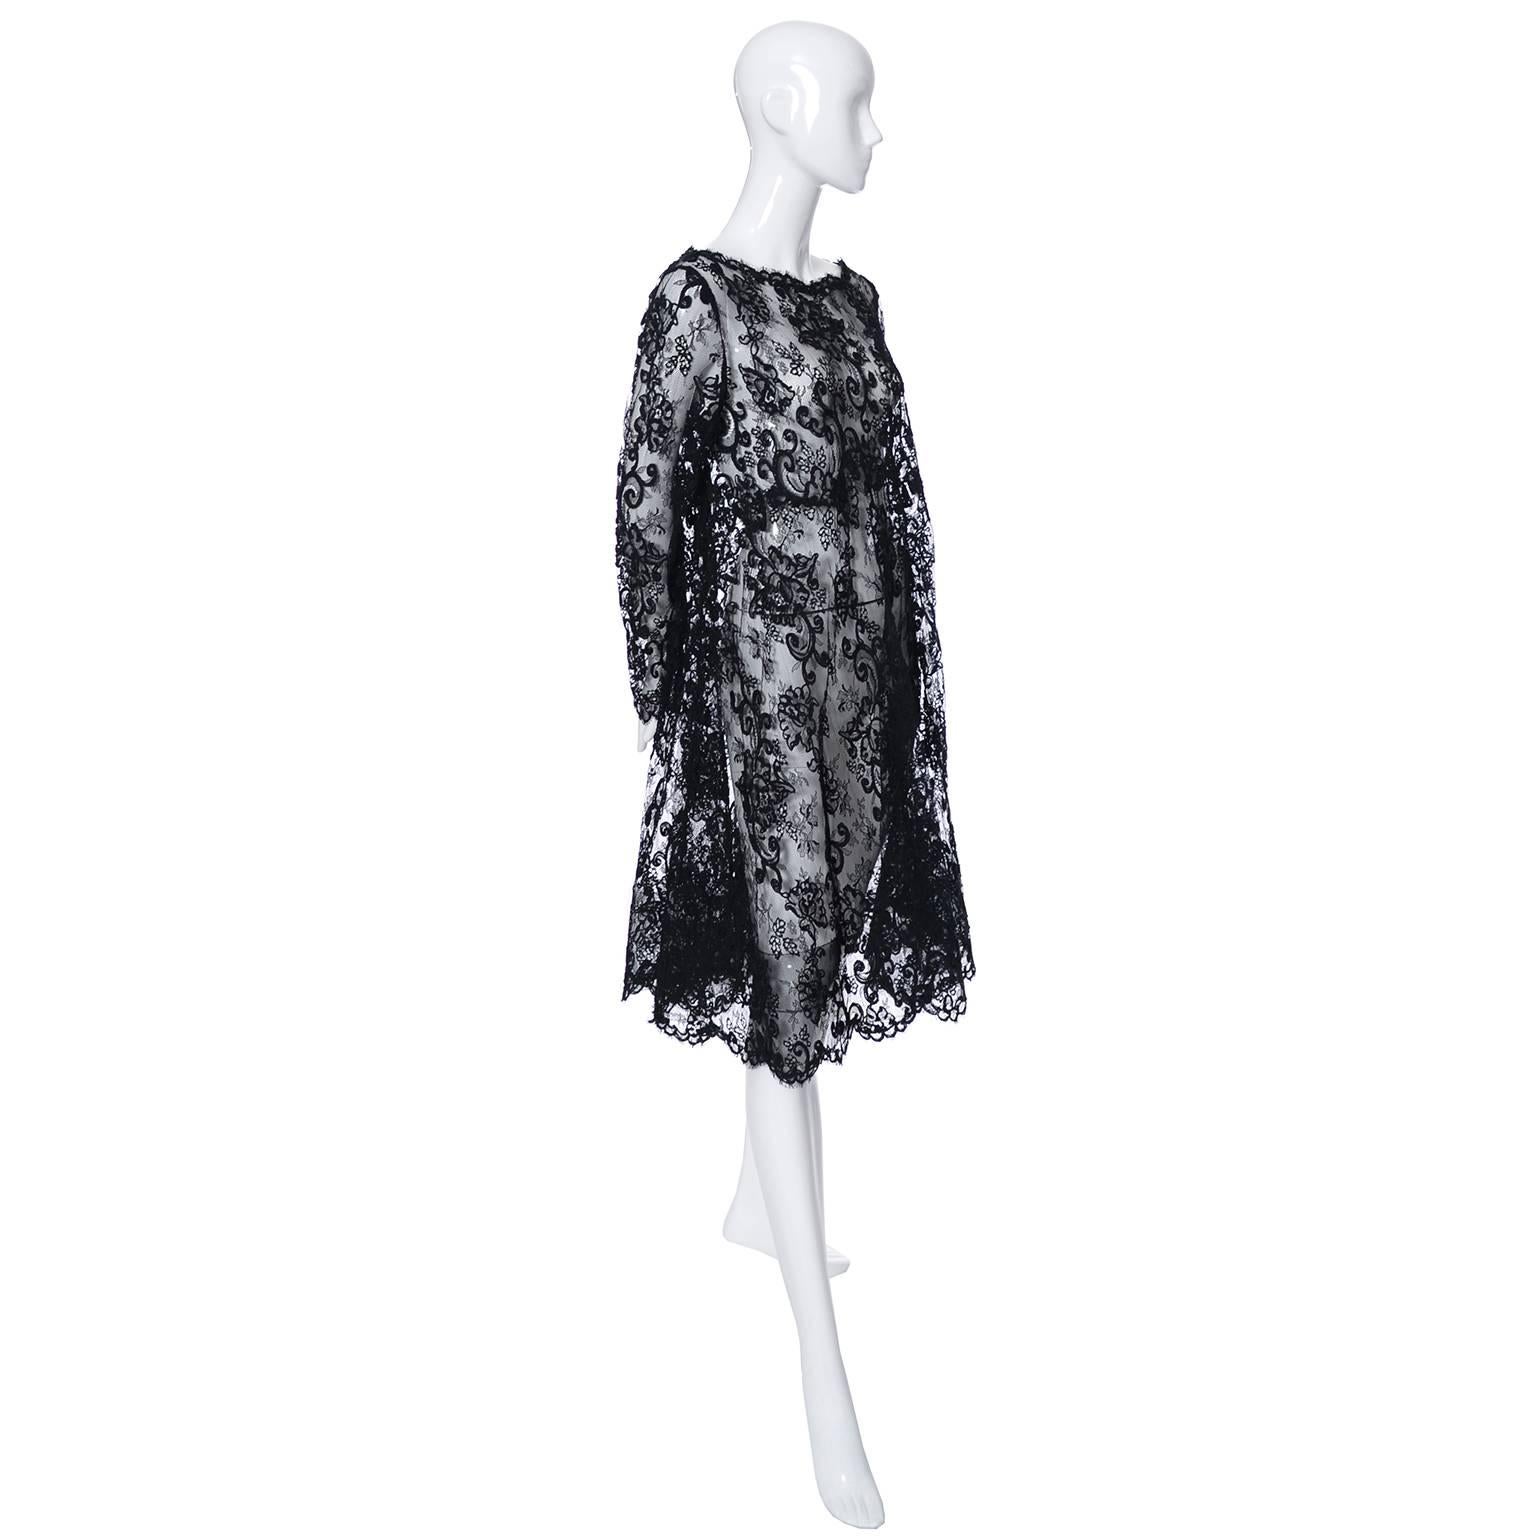 This exceptionally fine all lace black vintage dress comes from the estate of a woman who owned a couture salon from the 1950's through the 1980's.  Unfortunately, it is not labeled, I believe the designer label would have been in the black slip